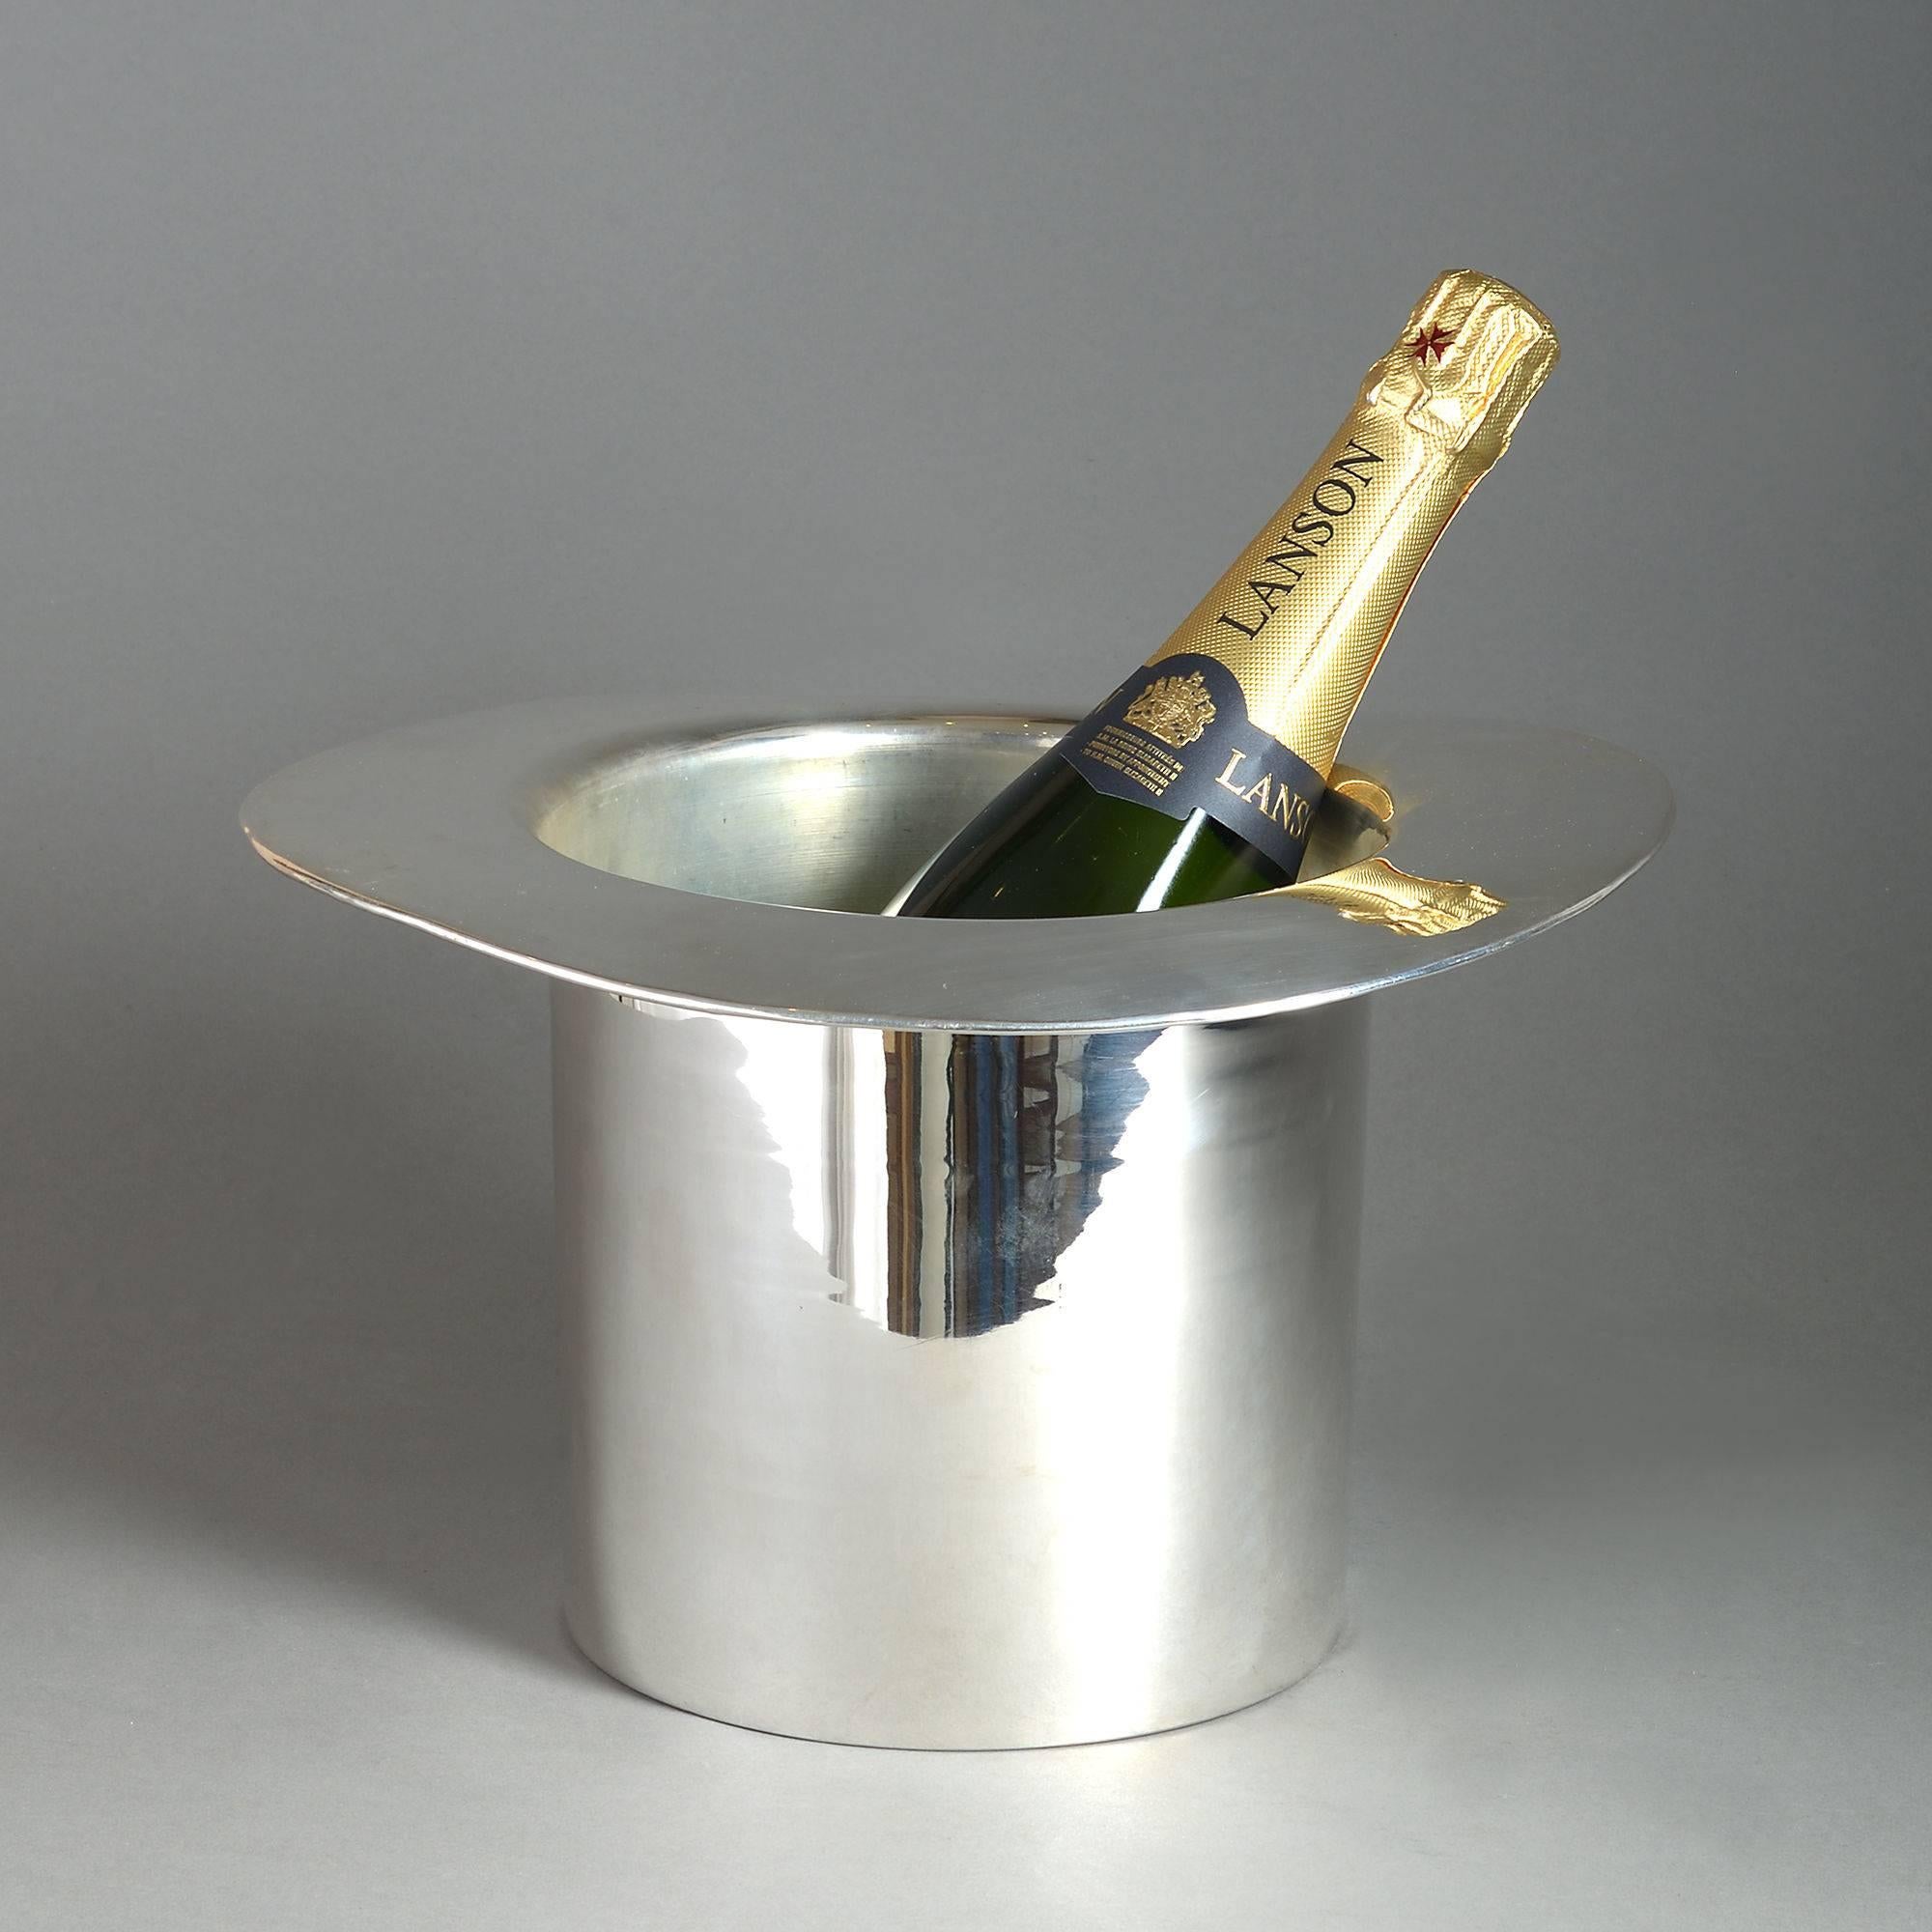 A mid-20th century silver plated champagne ice bucket, fashioned in the form of a top hat.